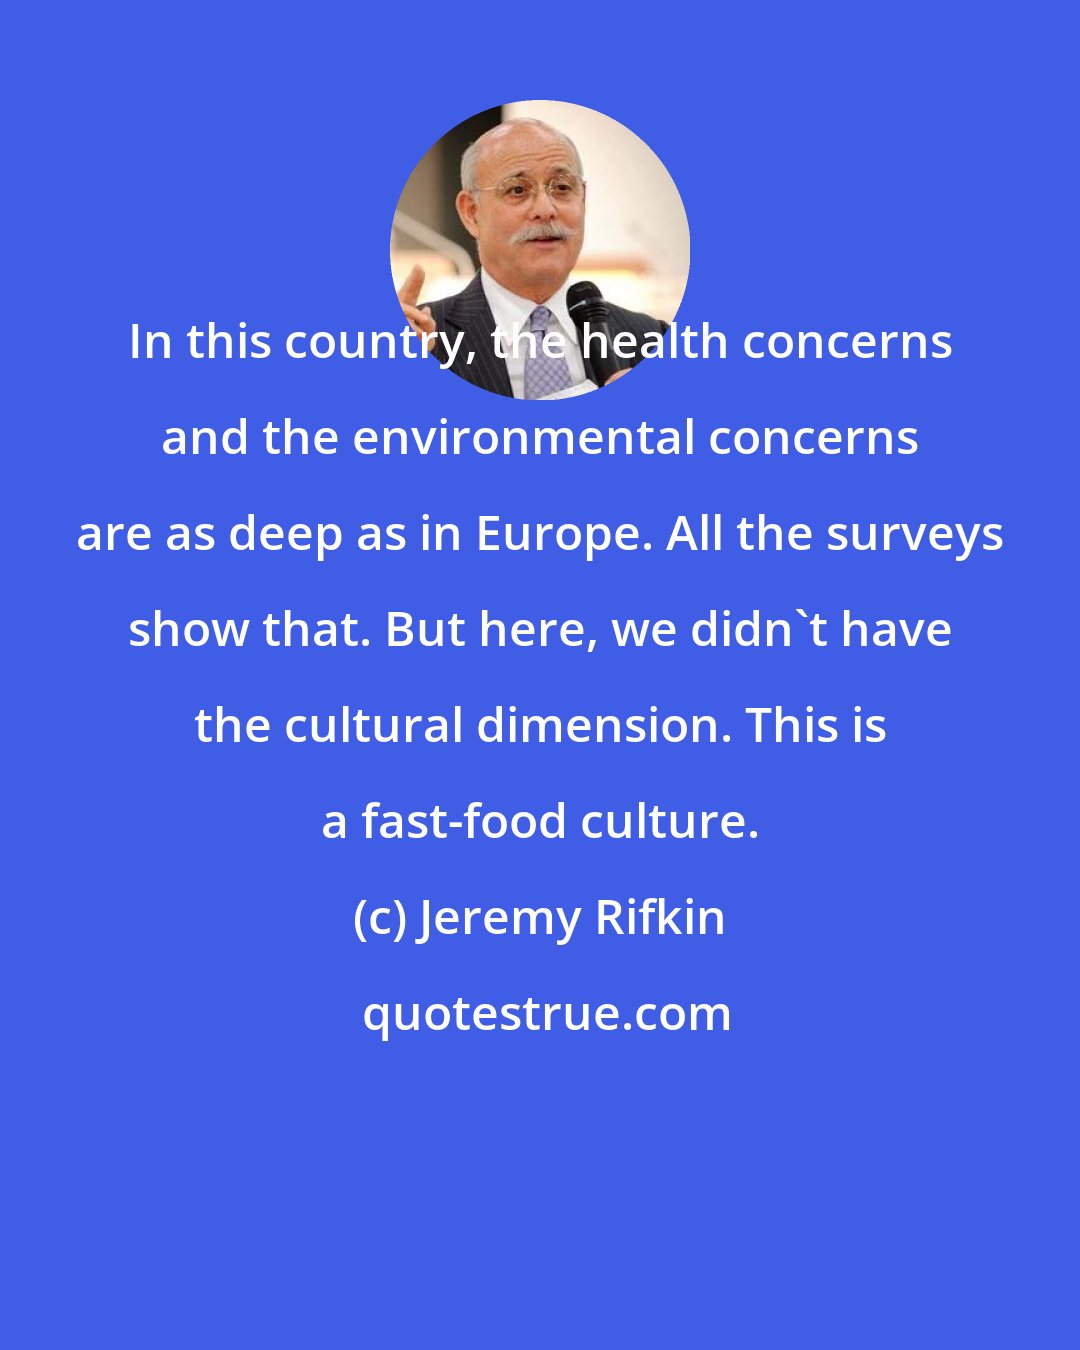 Jeremy Rifkin: In this country, the health concerns and the environmental concerns are as deep as in Europe. All the surveys show that. But here, we didn't have the cultural dimension. This is a fast-food culture.